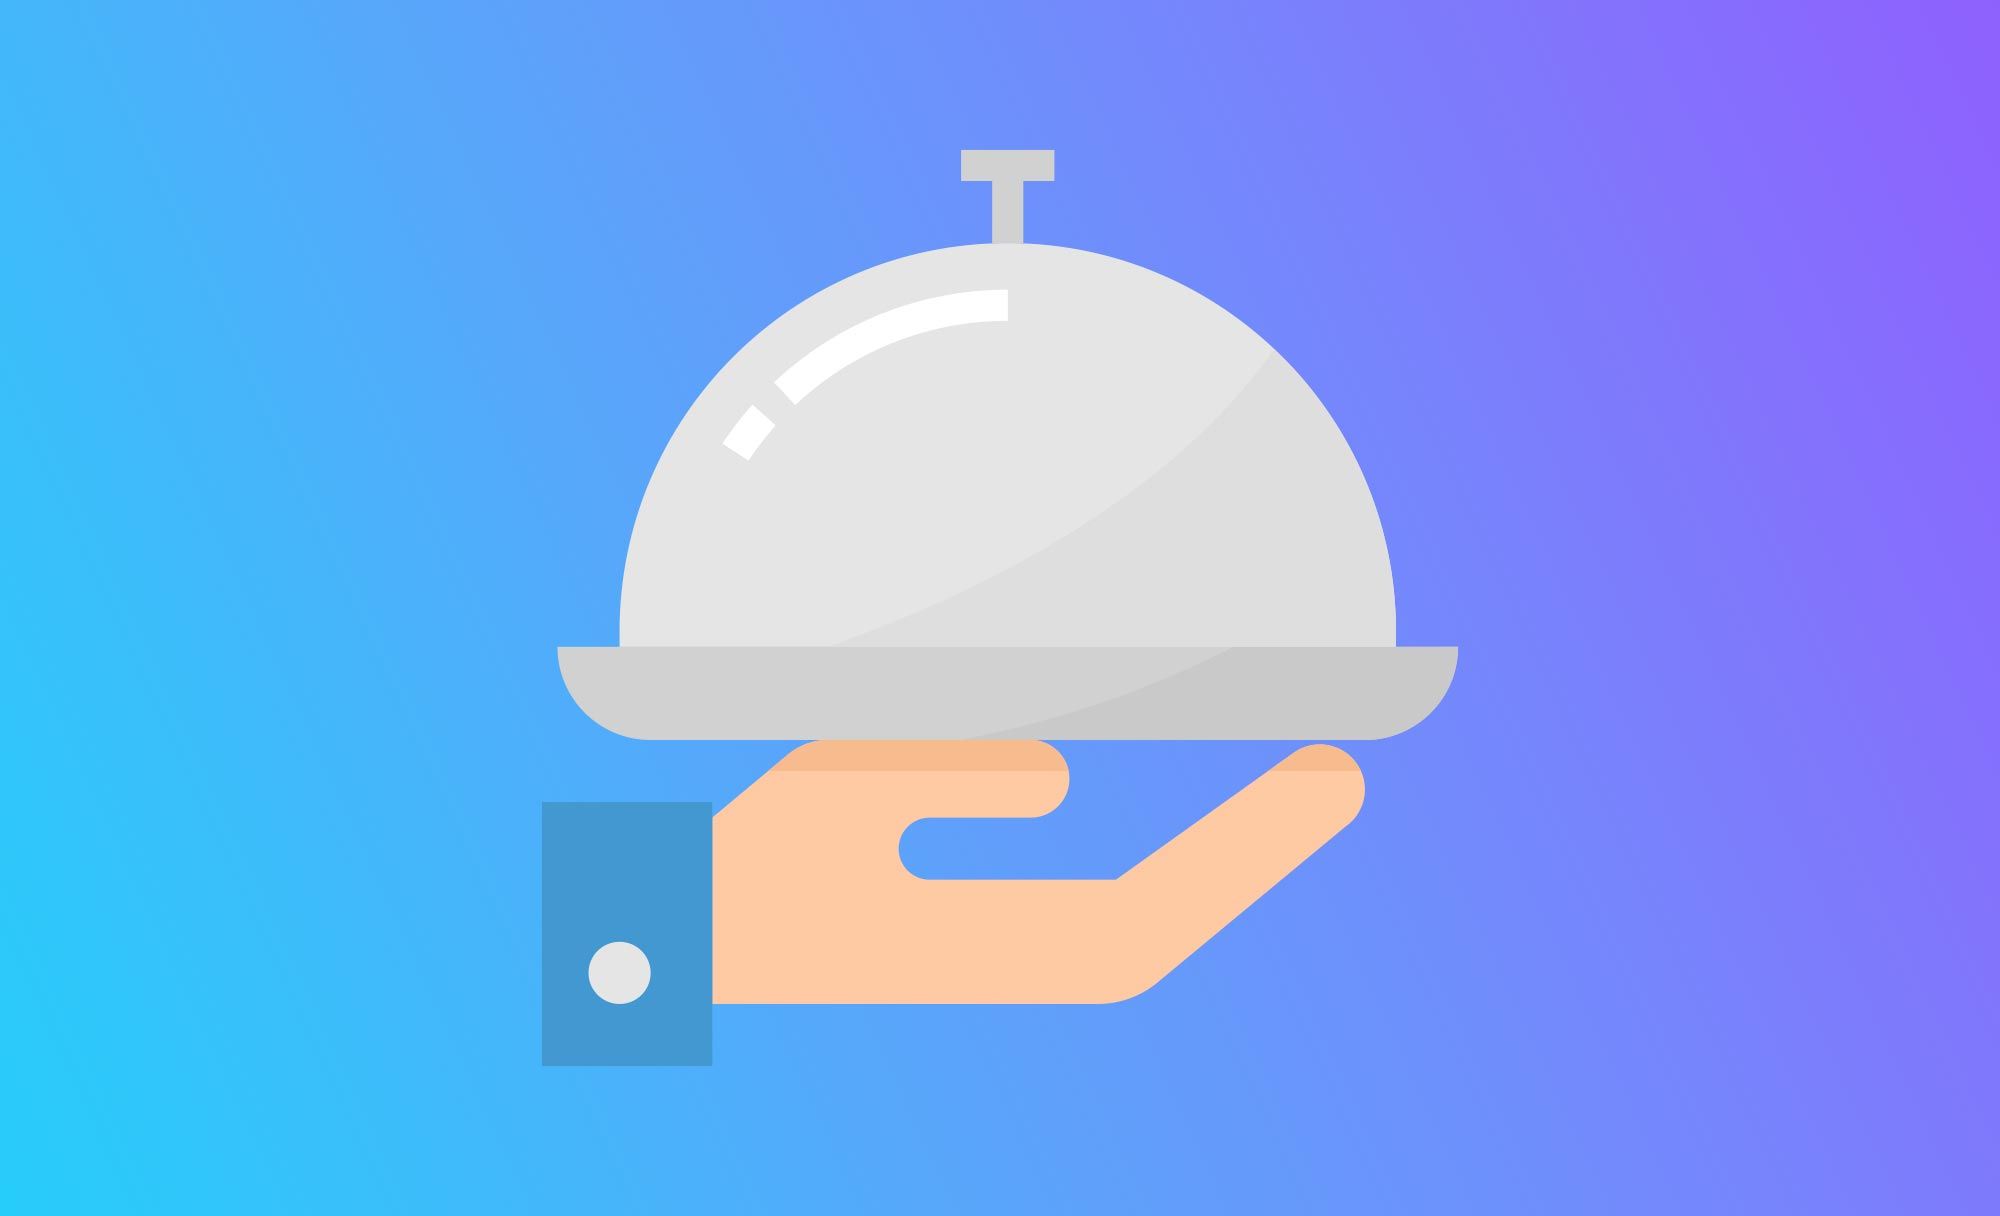 Want Google restaurant reviews? Here's how to rank #1